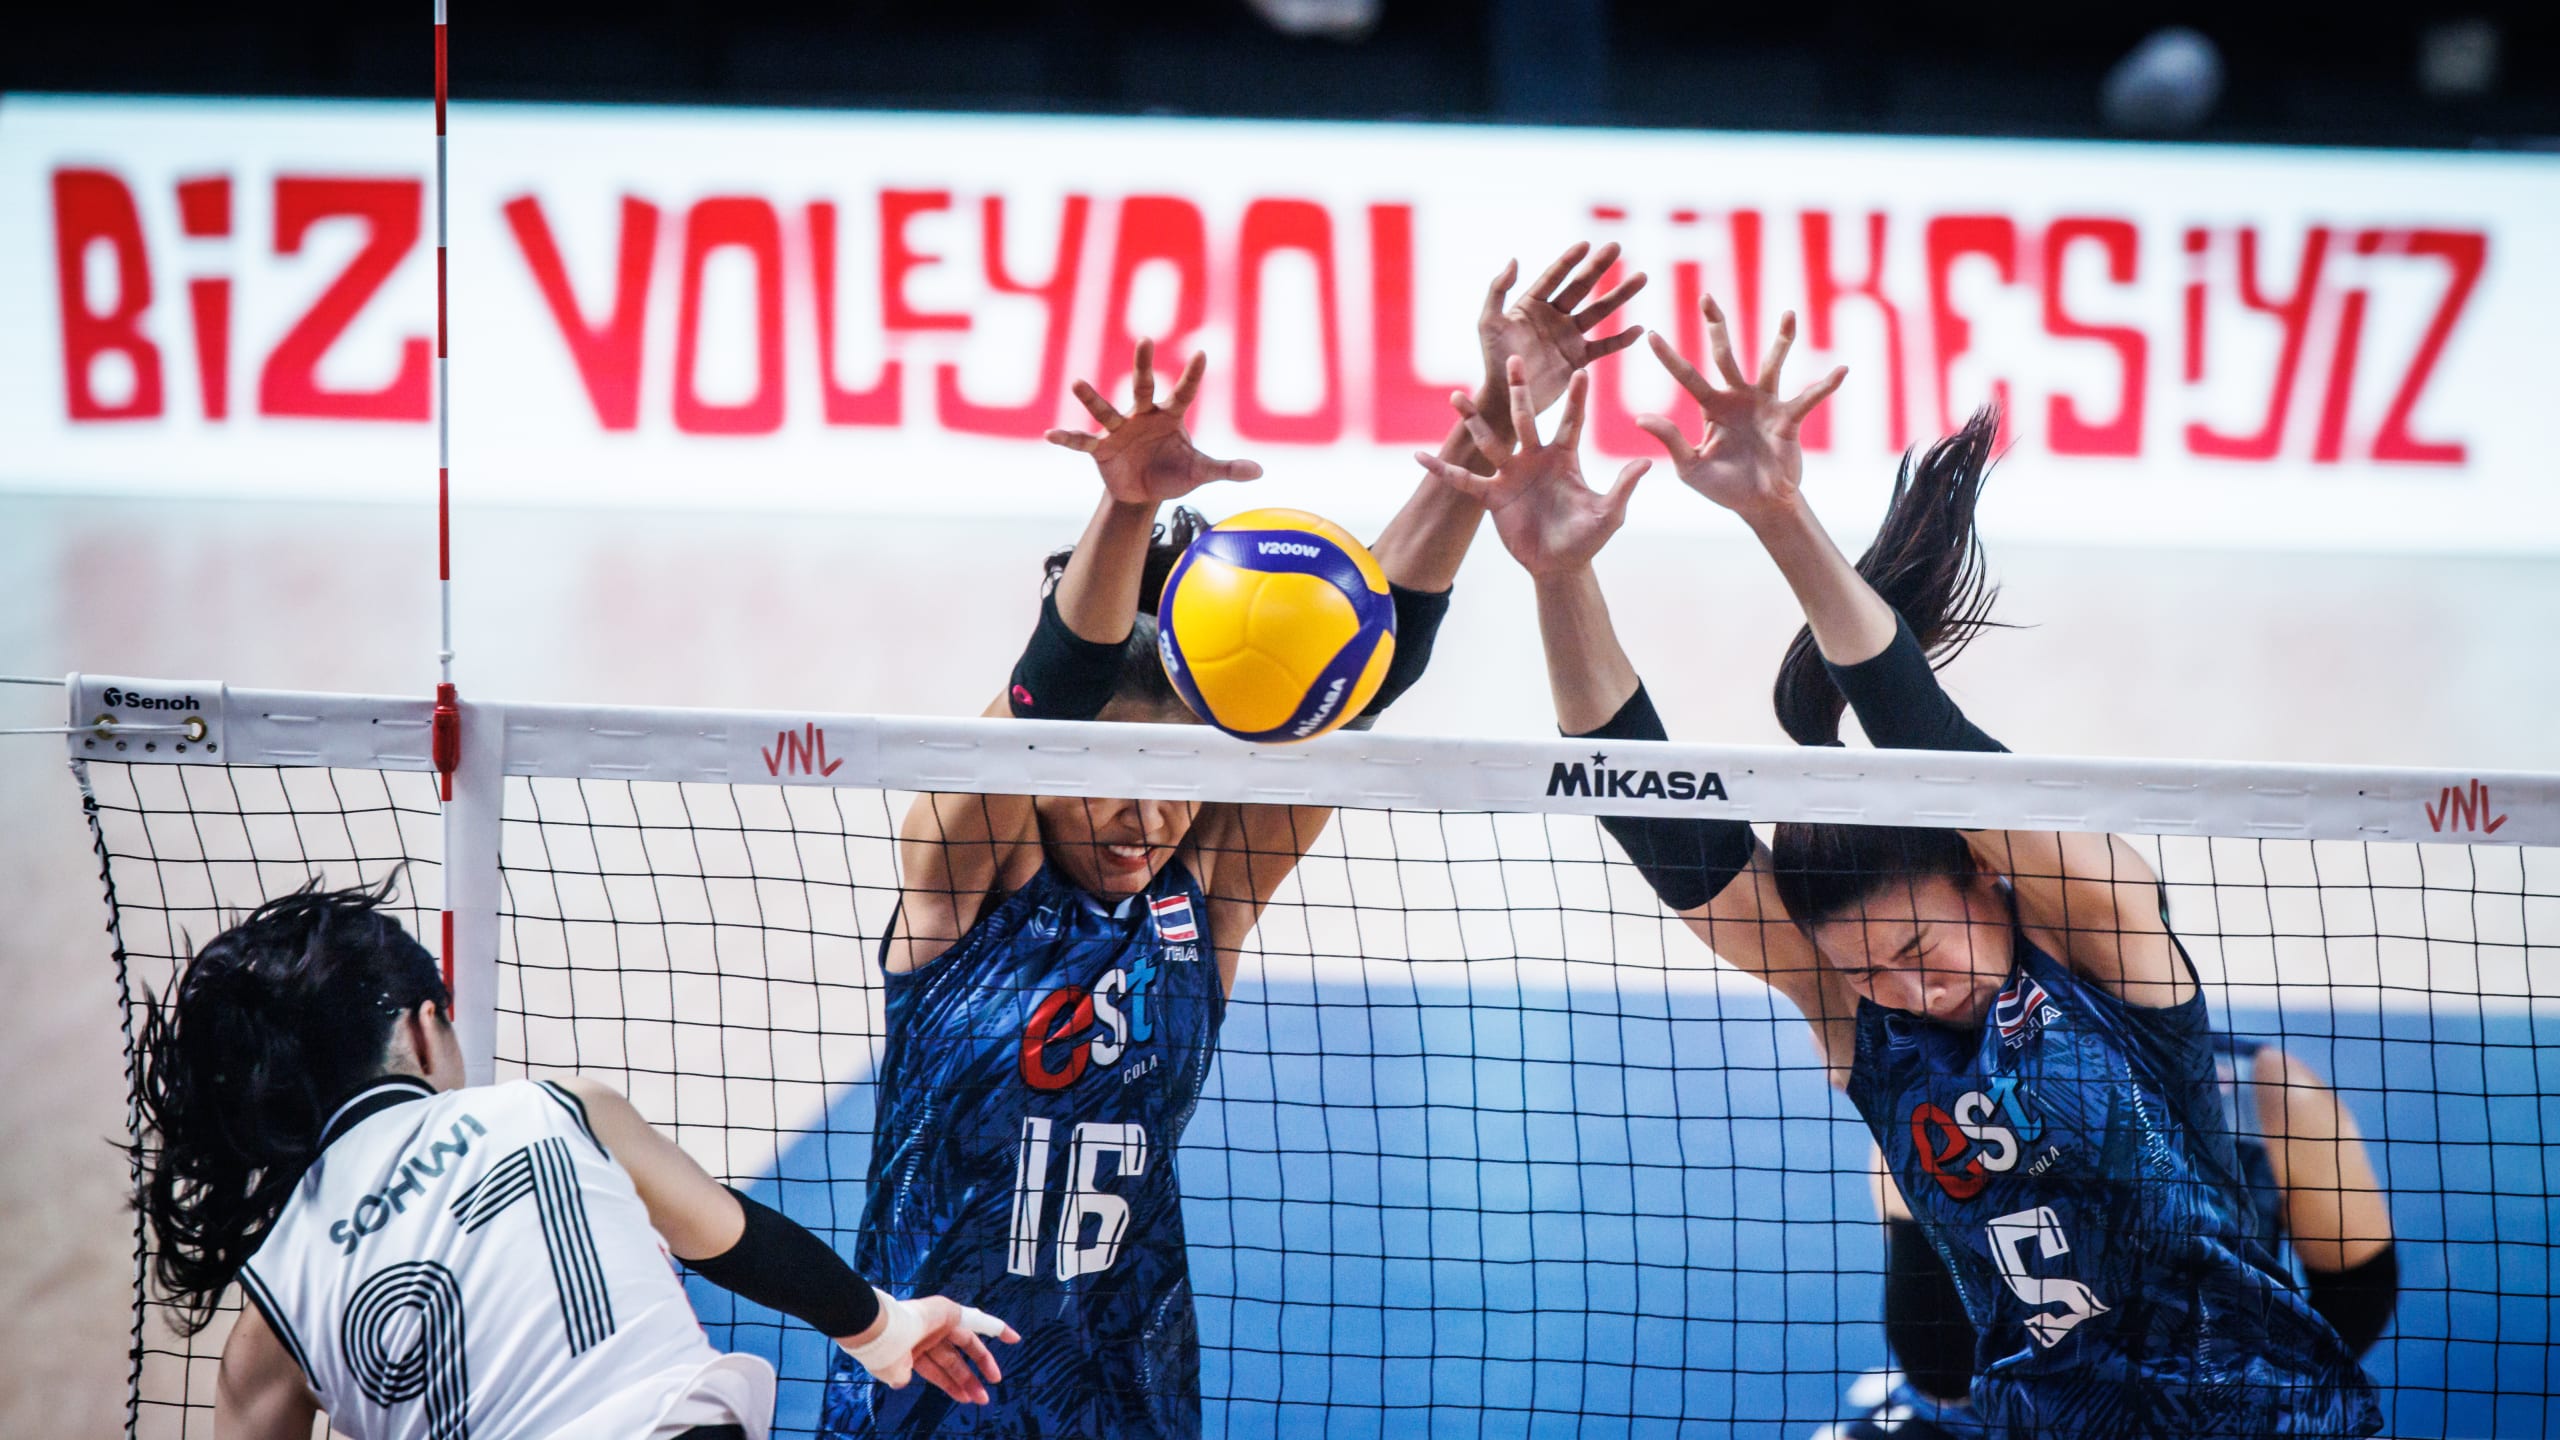 VOLLEYBALL WORLD SERVES UP FIRST-EVER LIMITED-EDITION WORLD CHAMPIONSHIP  BEACH VOLLEYBALL! - Asian Volleyball Confederation